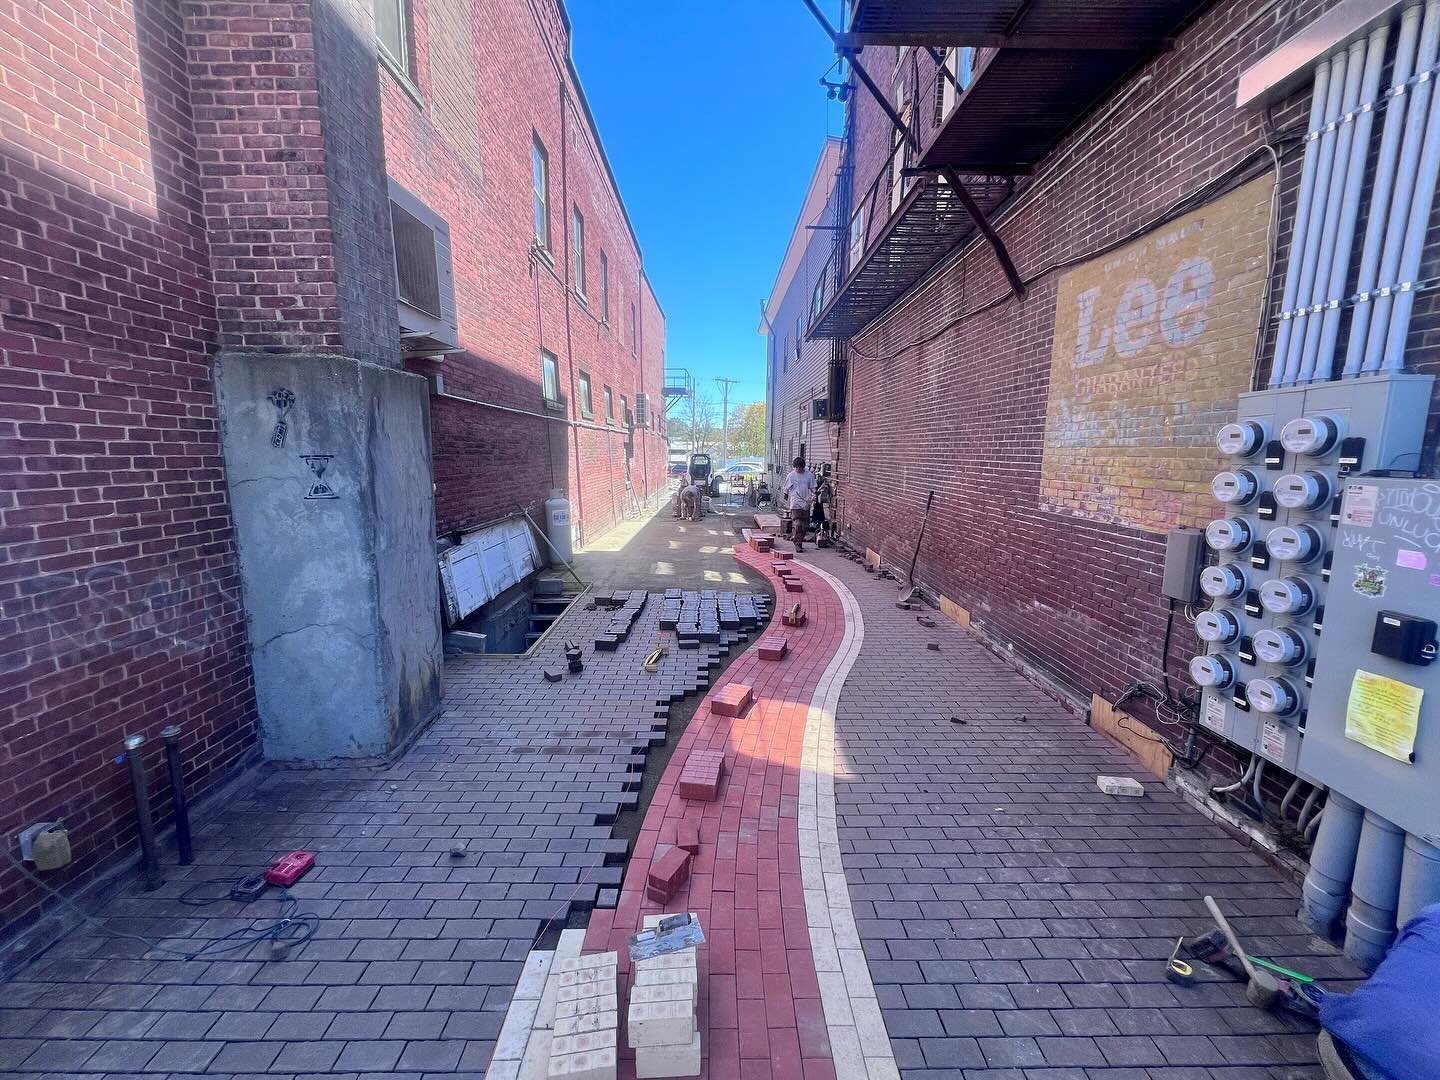 Making progress on our Waterbury alley project.  #revitalizingwaterbury  #landscapearchitecture